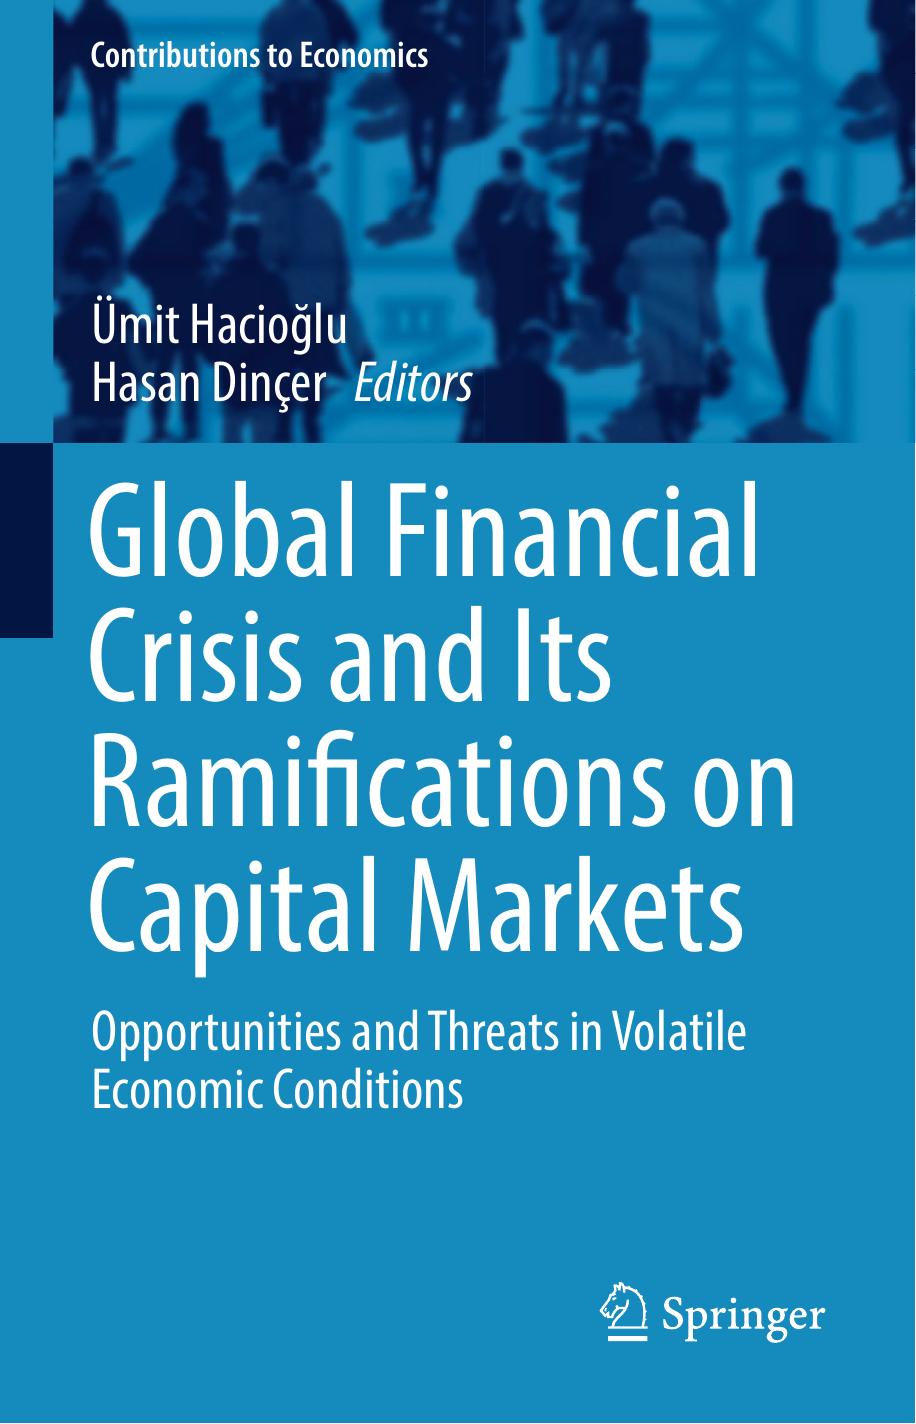 Global Financial Crisis and Its Ramifications on Capital Markets  Opportunities and Threats in Volatile Economic Conditions 2017